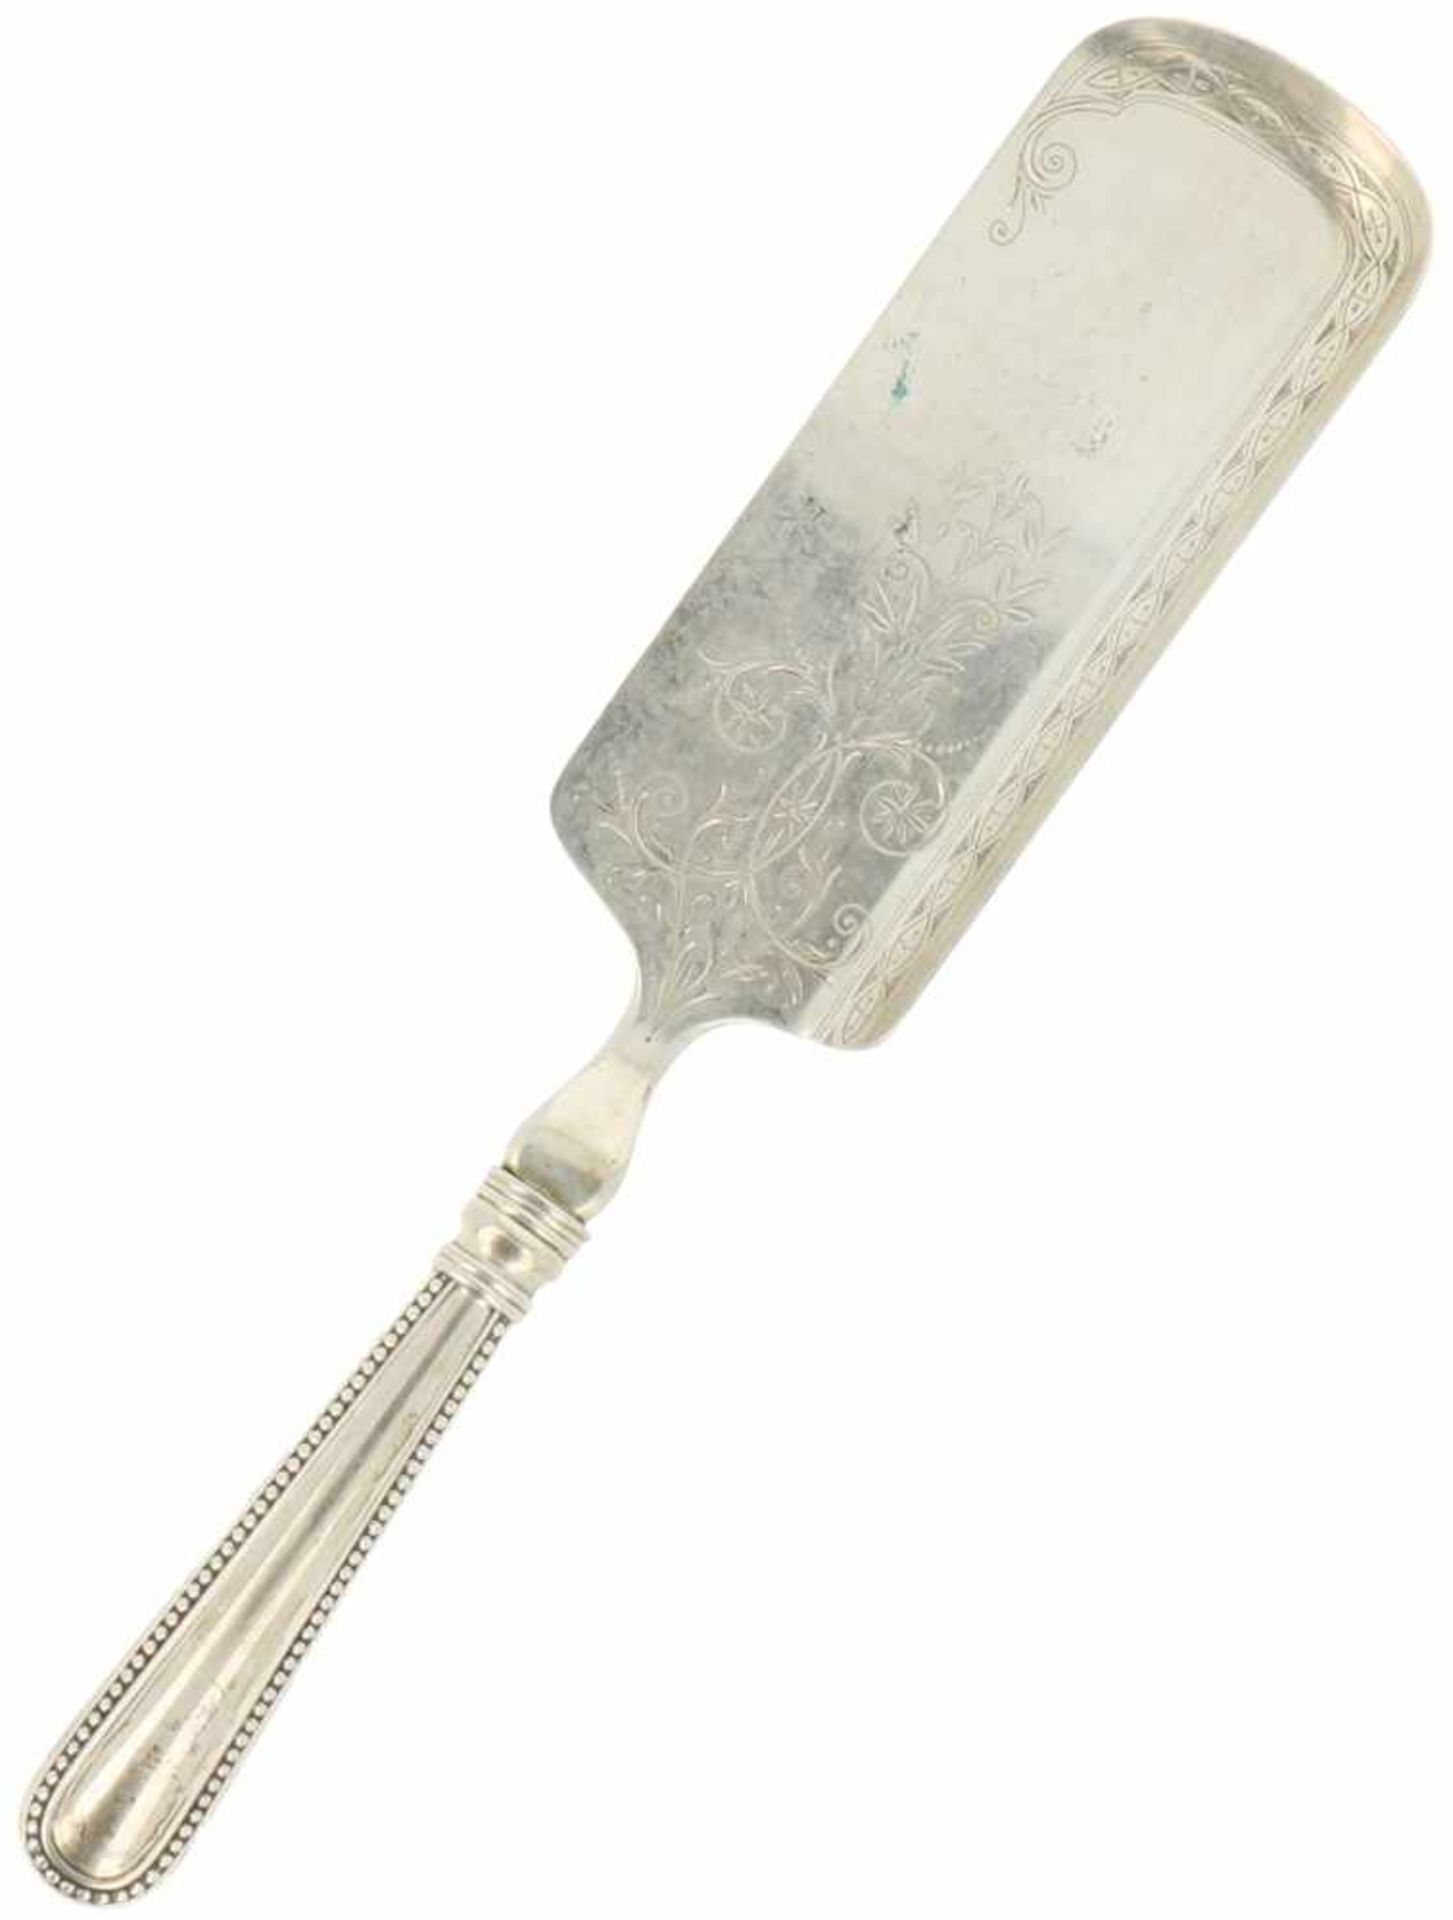 Silver pastry scoop.